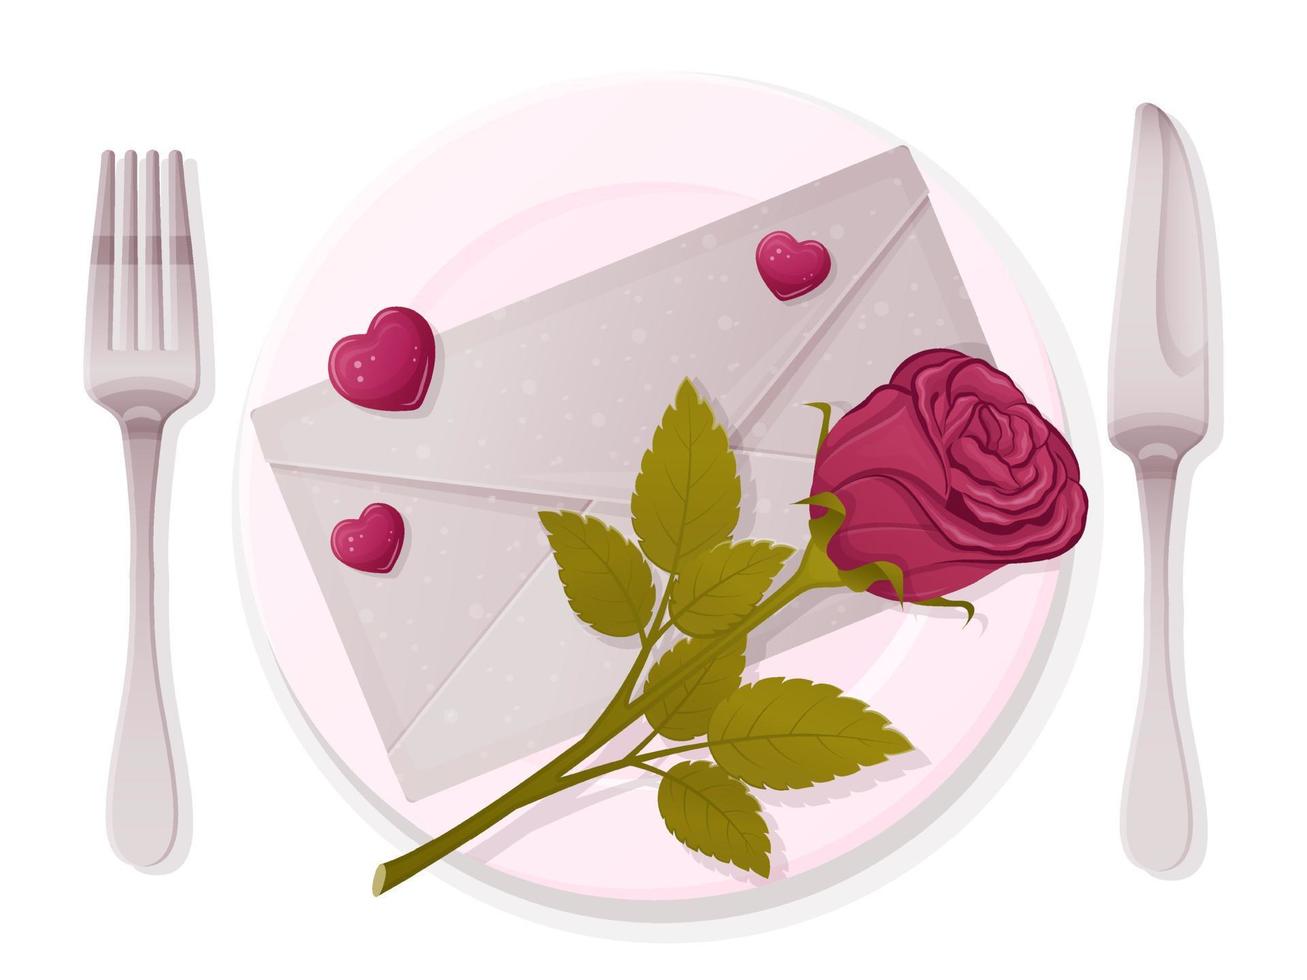 Valentines day card. Envelope and red heart on plate and silverware, special dinner. Vector illustration.